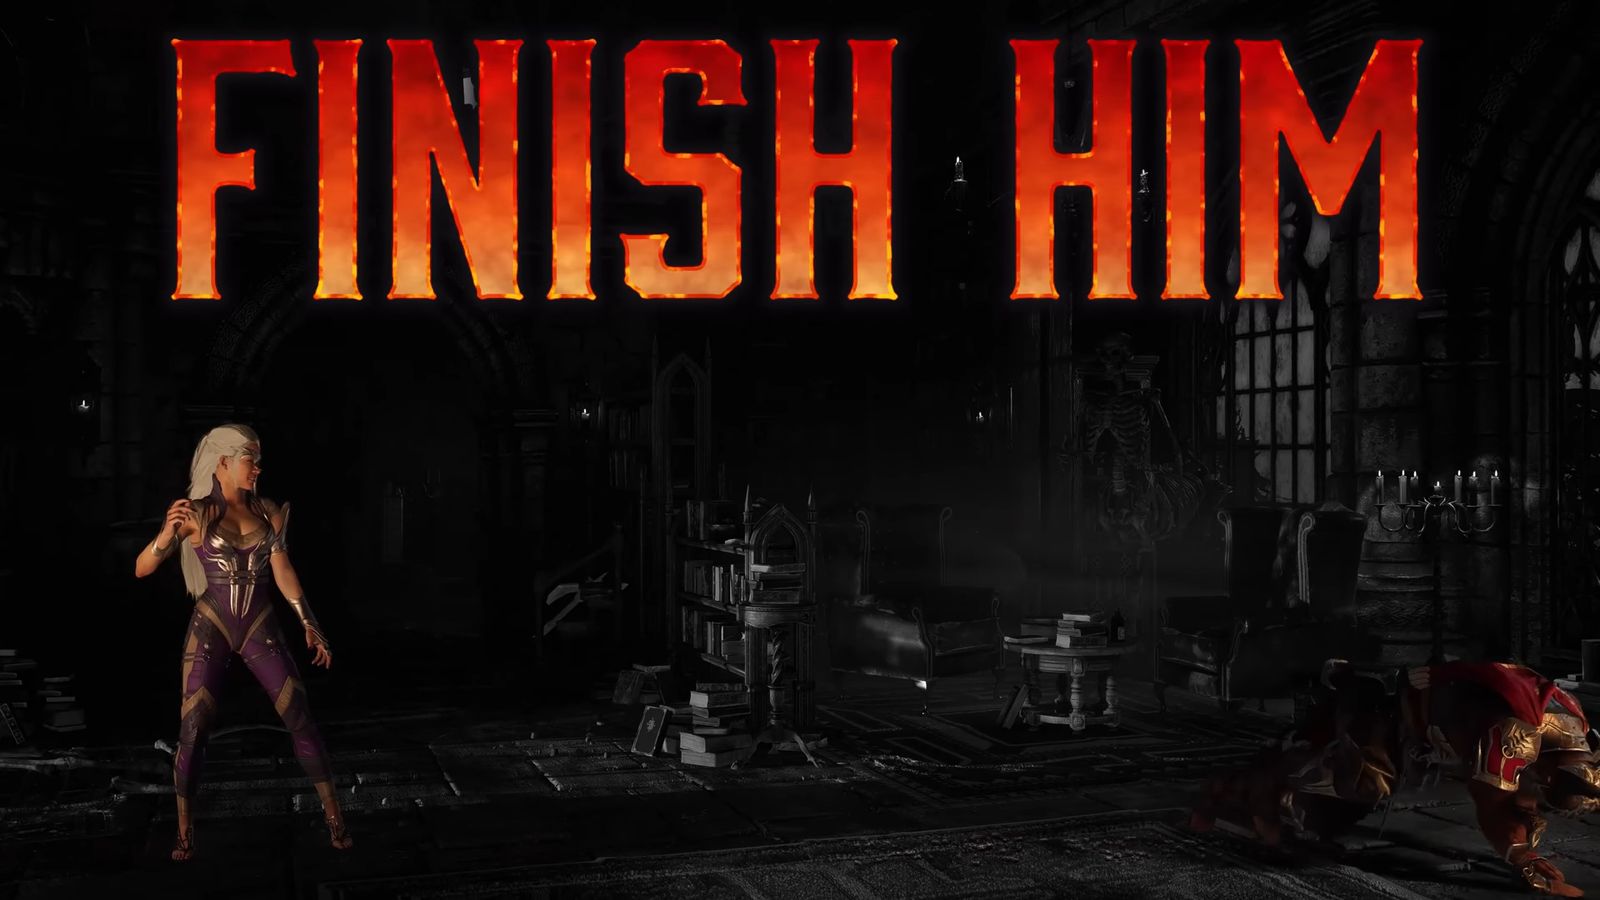 An image from Mortal Kombat 1 showing the game's iconic Finish Him graphic.